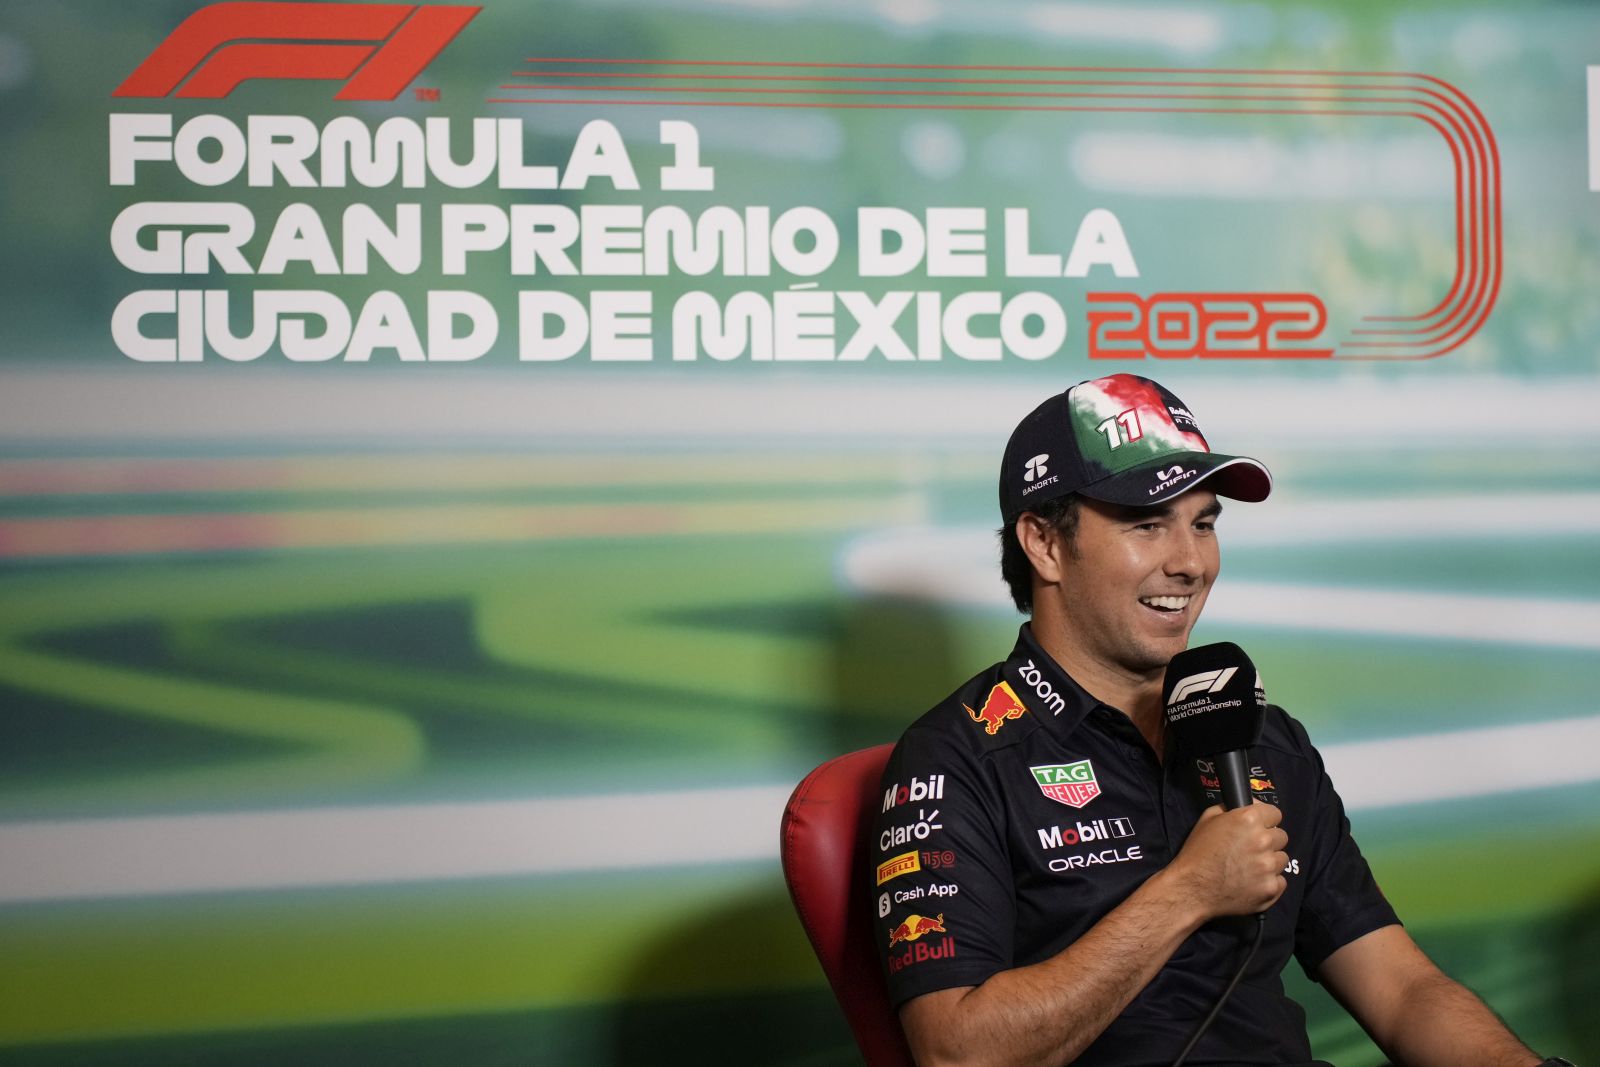 epa10270244 Mexican Formula One driver Sergio Perez of Red Bull Racing, speaks during a press conference as part of the Formula One Grand Prix of the Mexico City in Mexico City, Mexico, 27 October 2022. The Formula One Grand Prix of the Mexico City takes place on 30 October 2022 at the Circuit of Hermanos Rodriguez.  EPA/LUIS LICONA